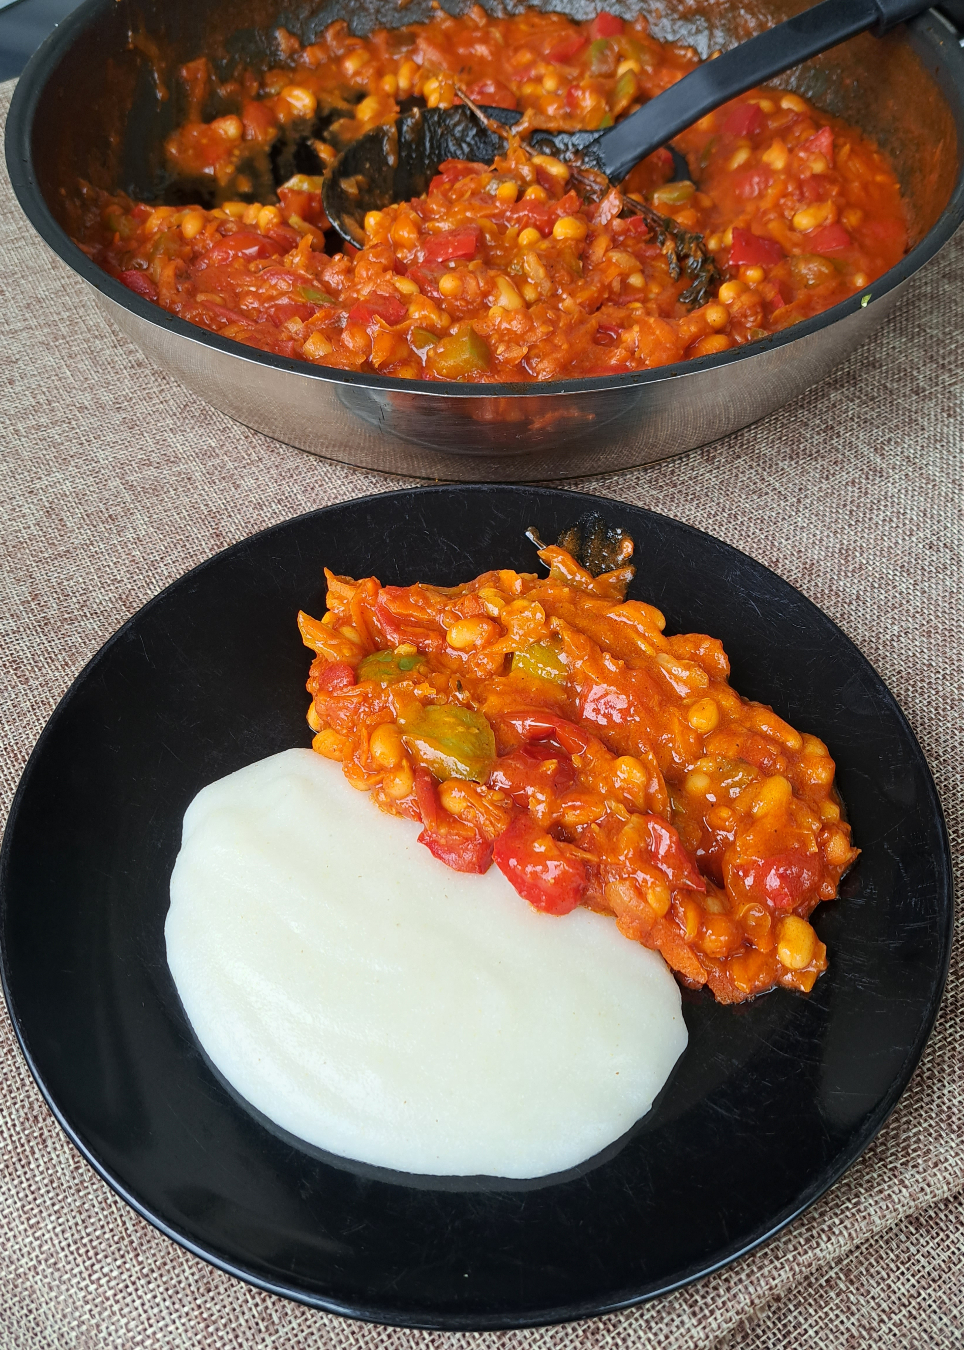 A photo of a pan with freshly cooked chakalaka and a plate of pap, a traditional South African porridge made from maize meal, on a table at a balcony.